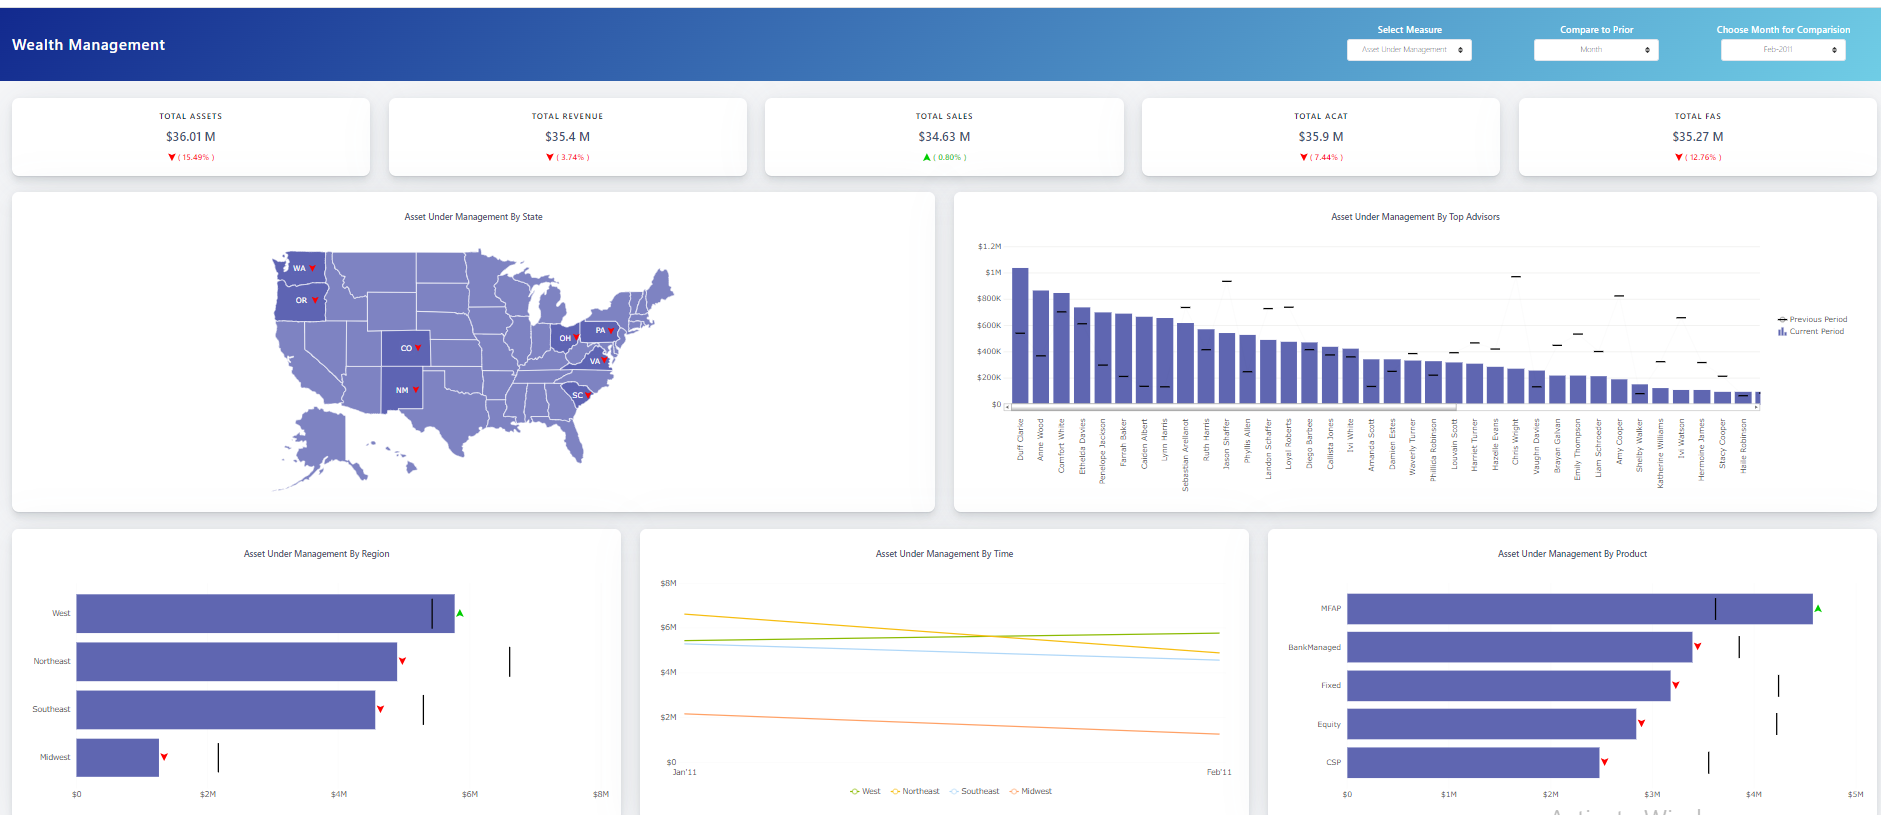 Performance dashboards - FusionCharts' wealth management dashboard